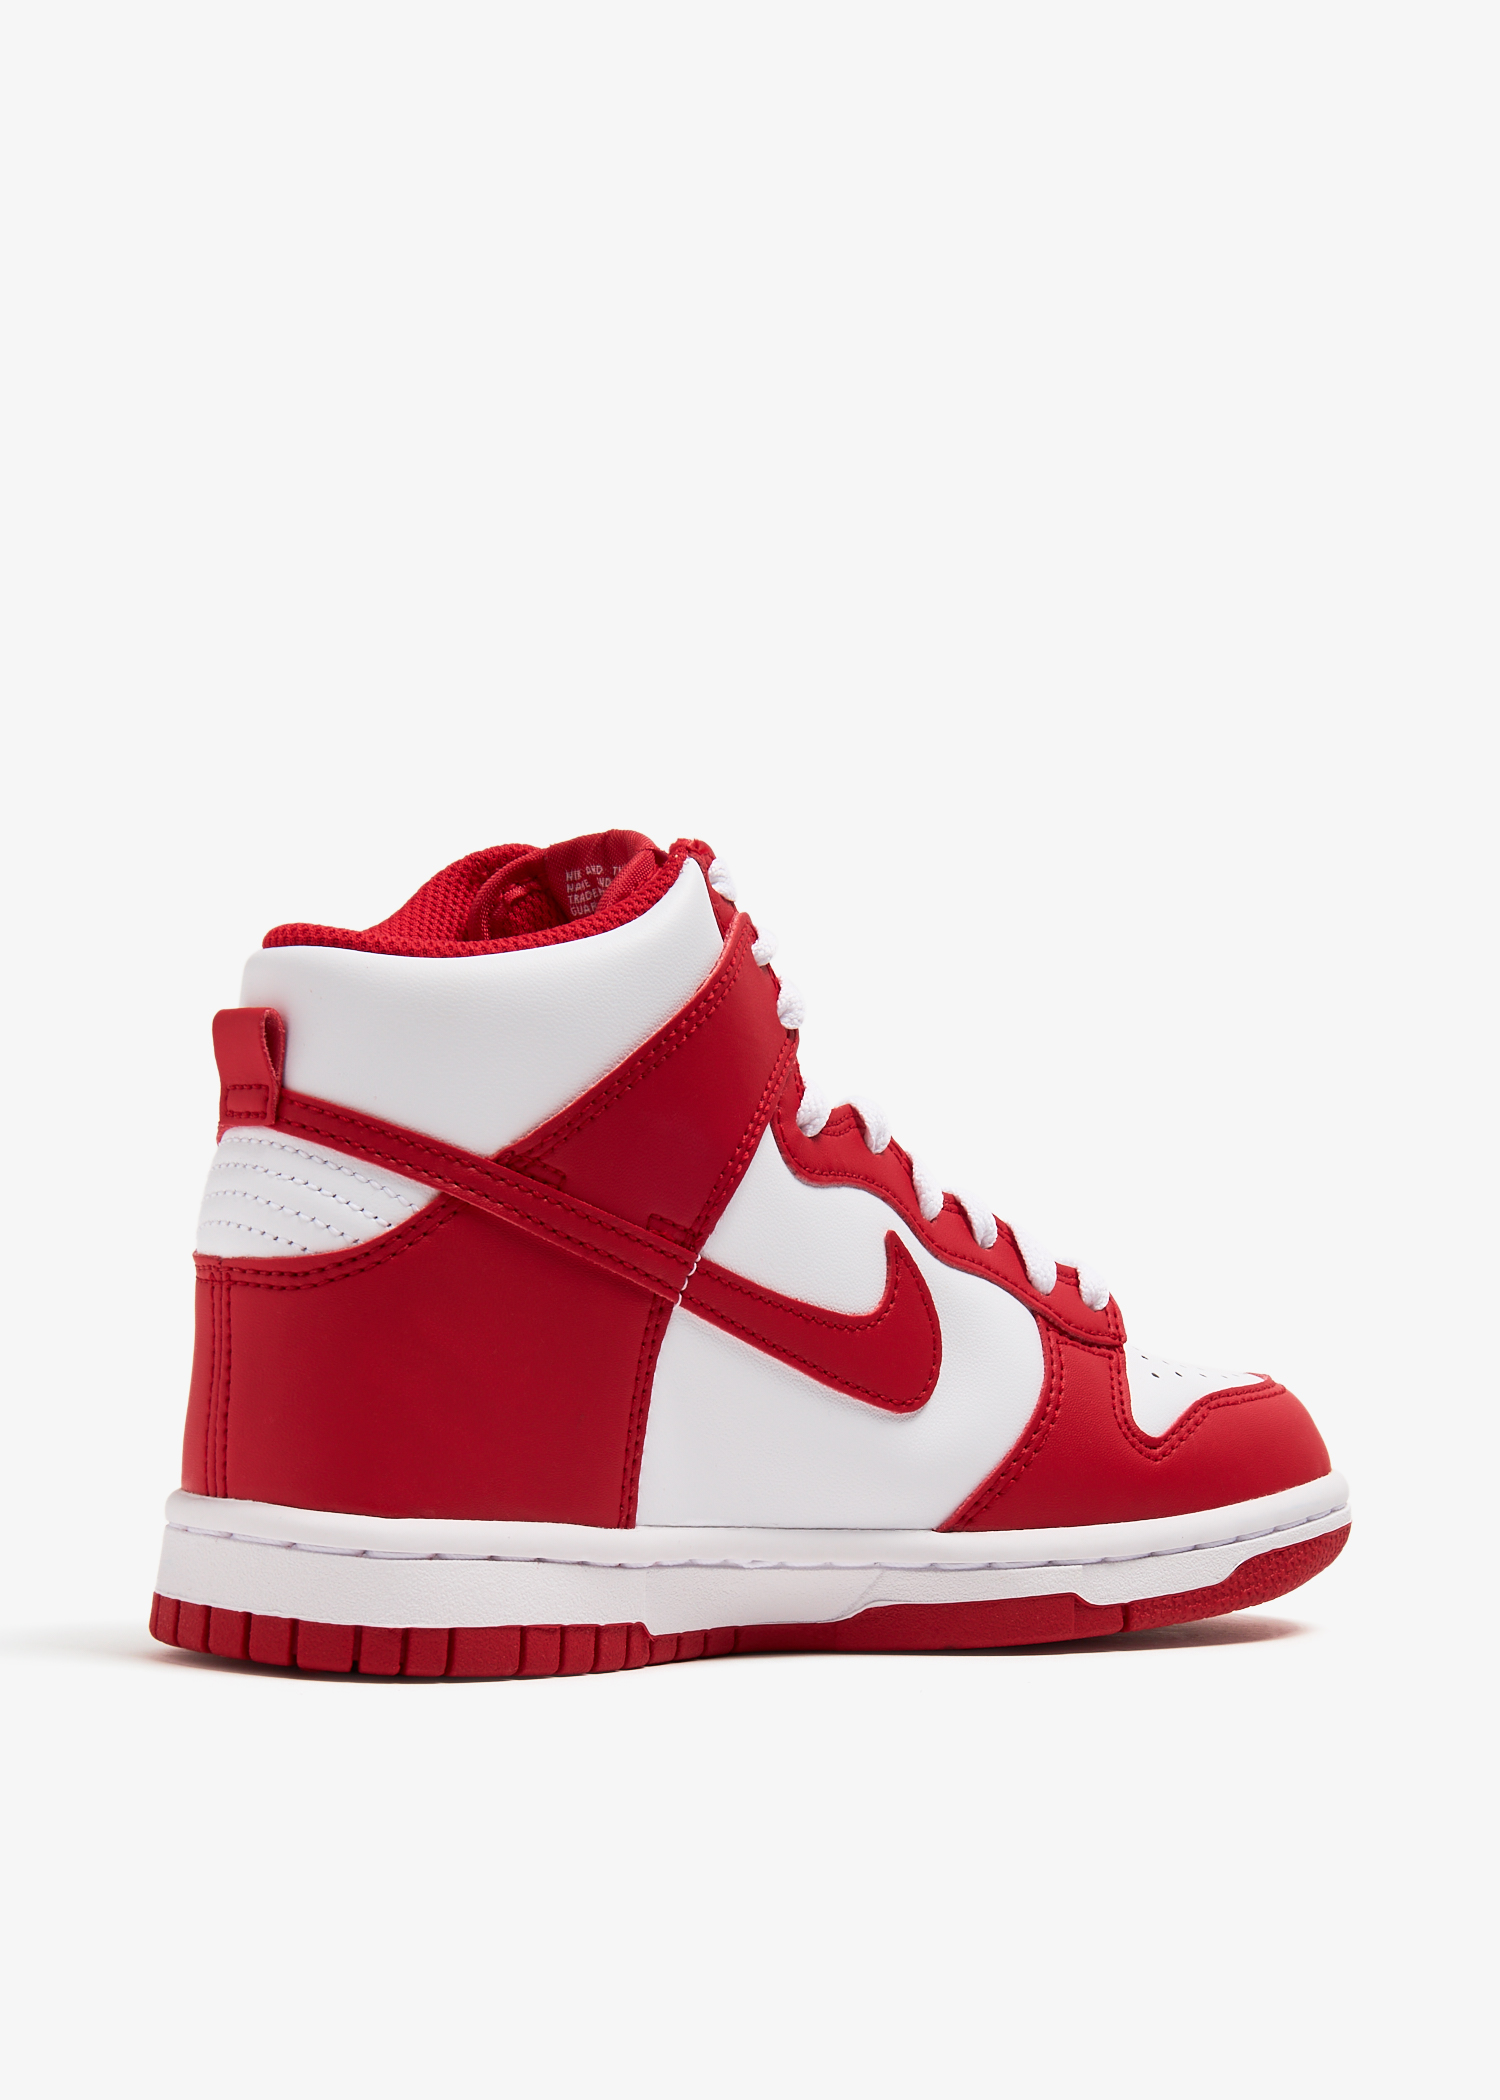 Nike Dunk High 'Championship Red' sneakers for Boy - Red in UAE | Level  Shoes